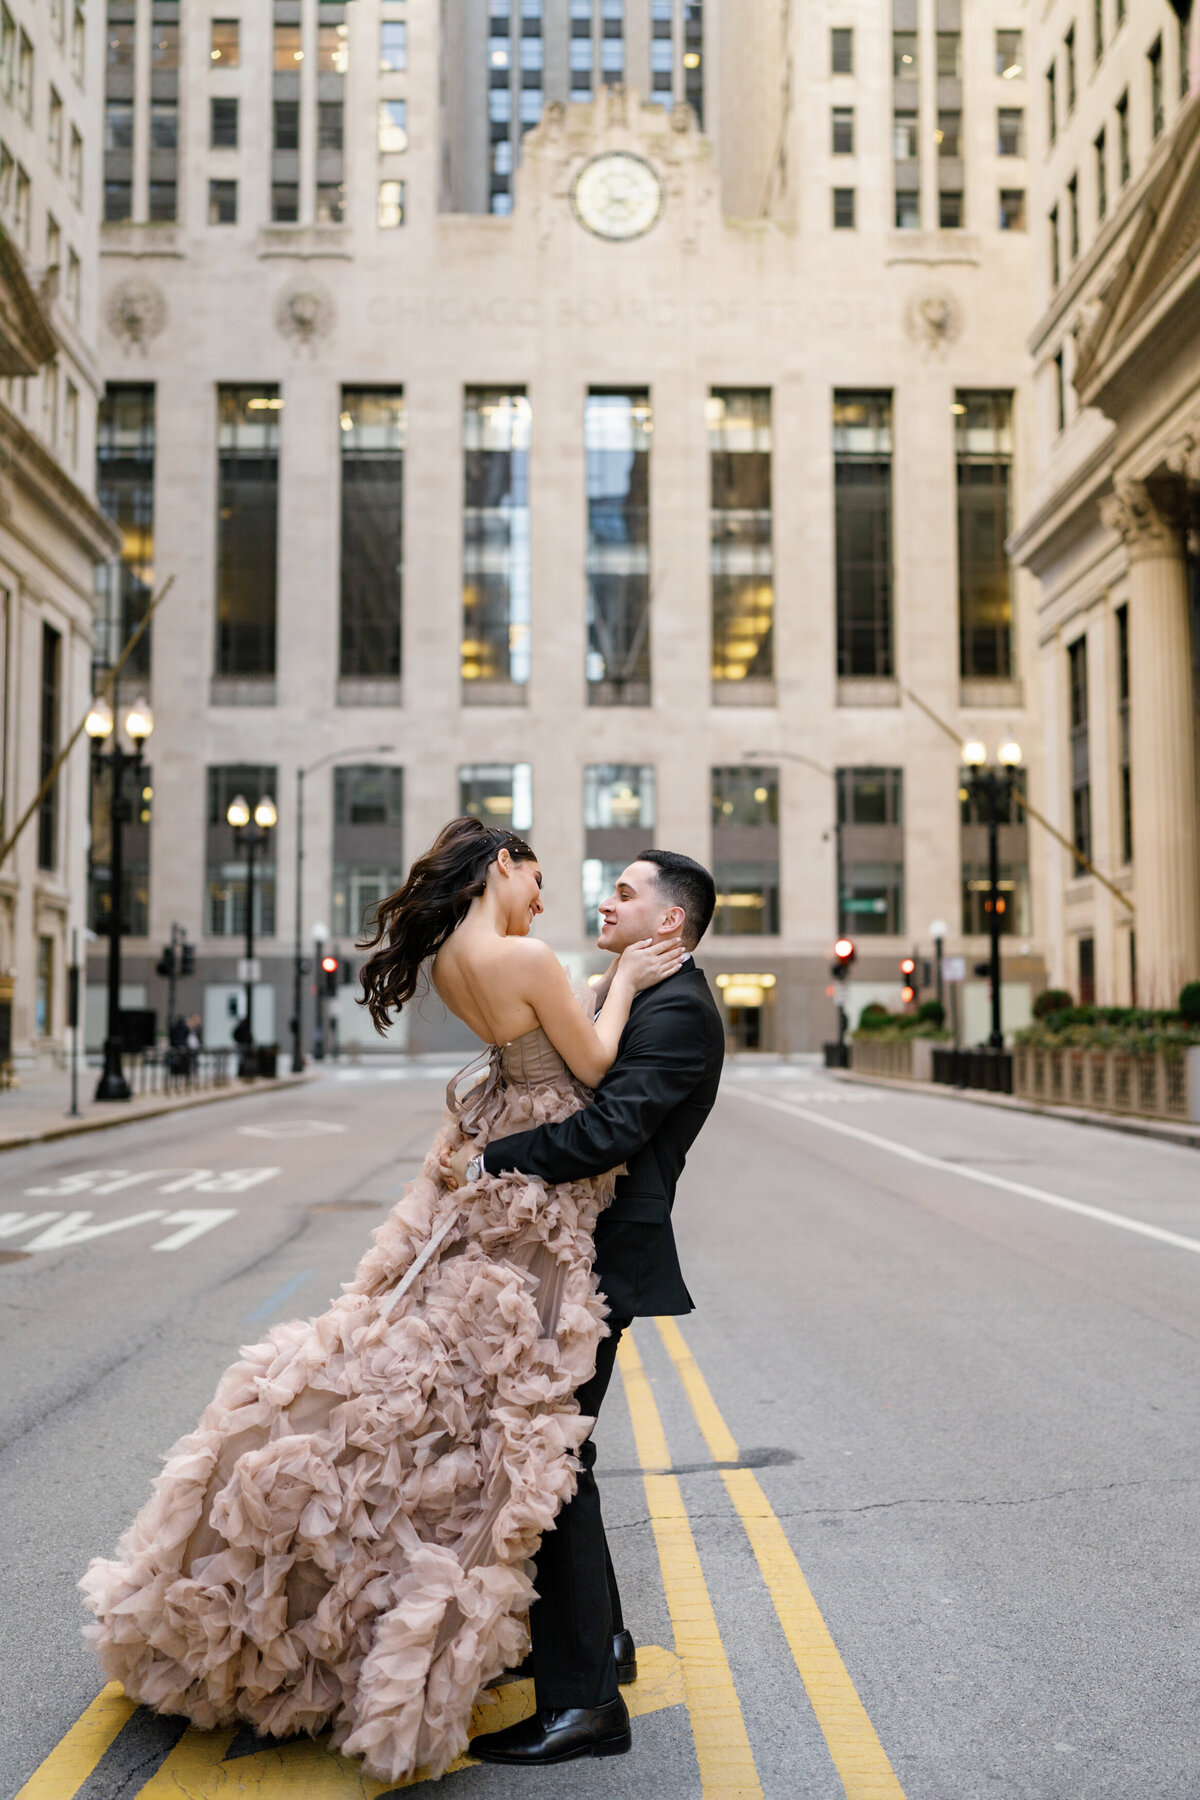 Aspen-Avenue-Chicago-Wedding-Photographer-Rookery-Engagement-Session-Histoircal-Stairs-Moody-Dramatic-Magazine-Unique-Gown-Stemming-From-Love-Emily-Rae-Bridal-Hair-FAV-61